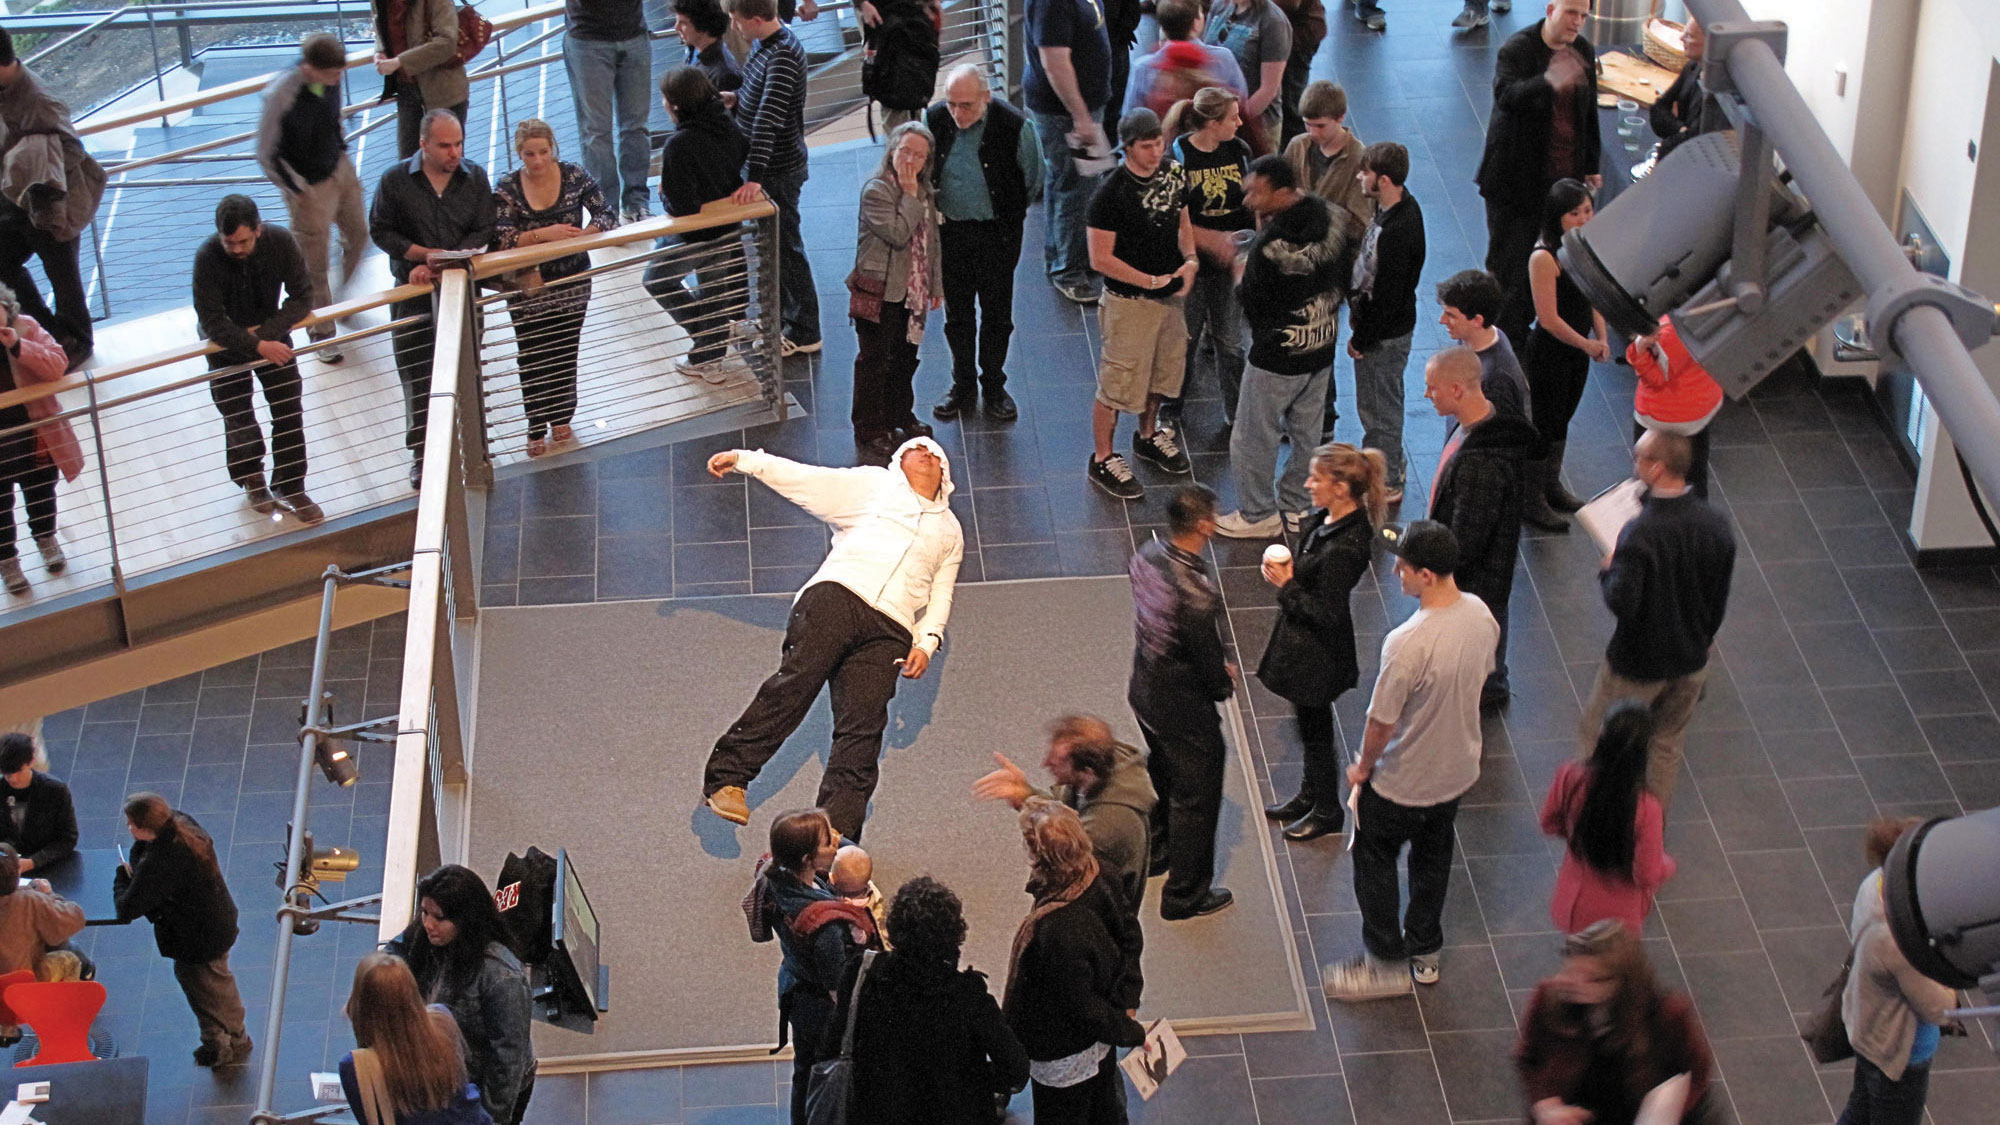 People gathered in the mezzanine watching a performer wearing a white hoodie and black pants leaning back dramatically, almost falling over. 